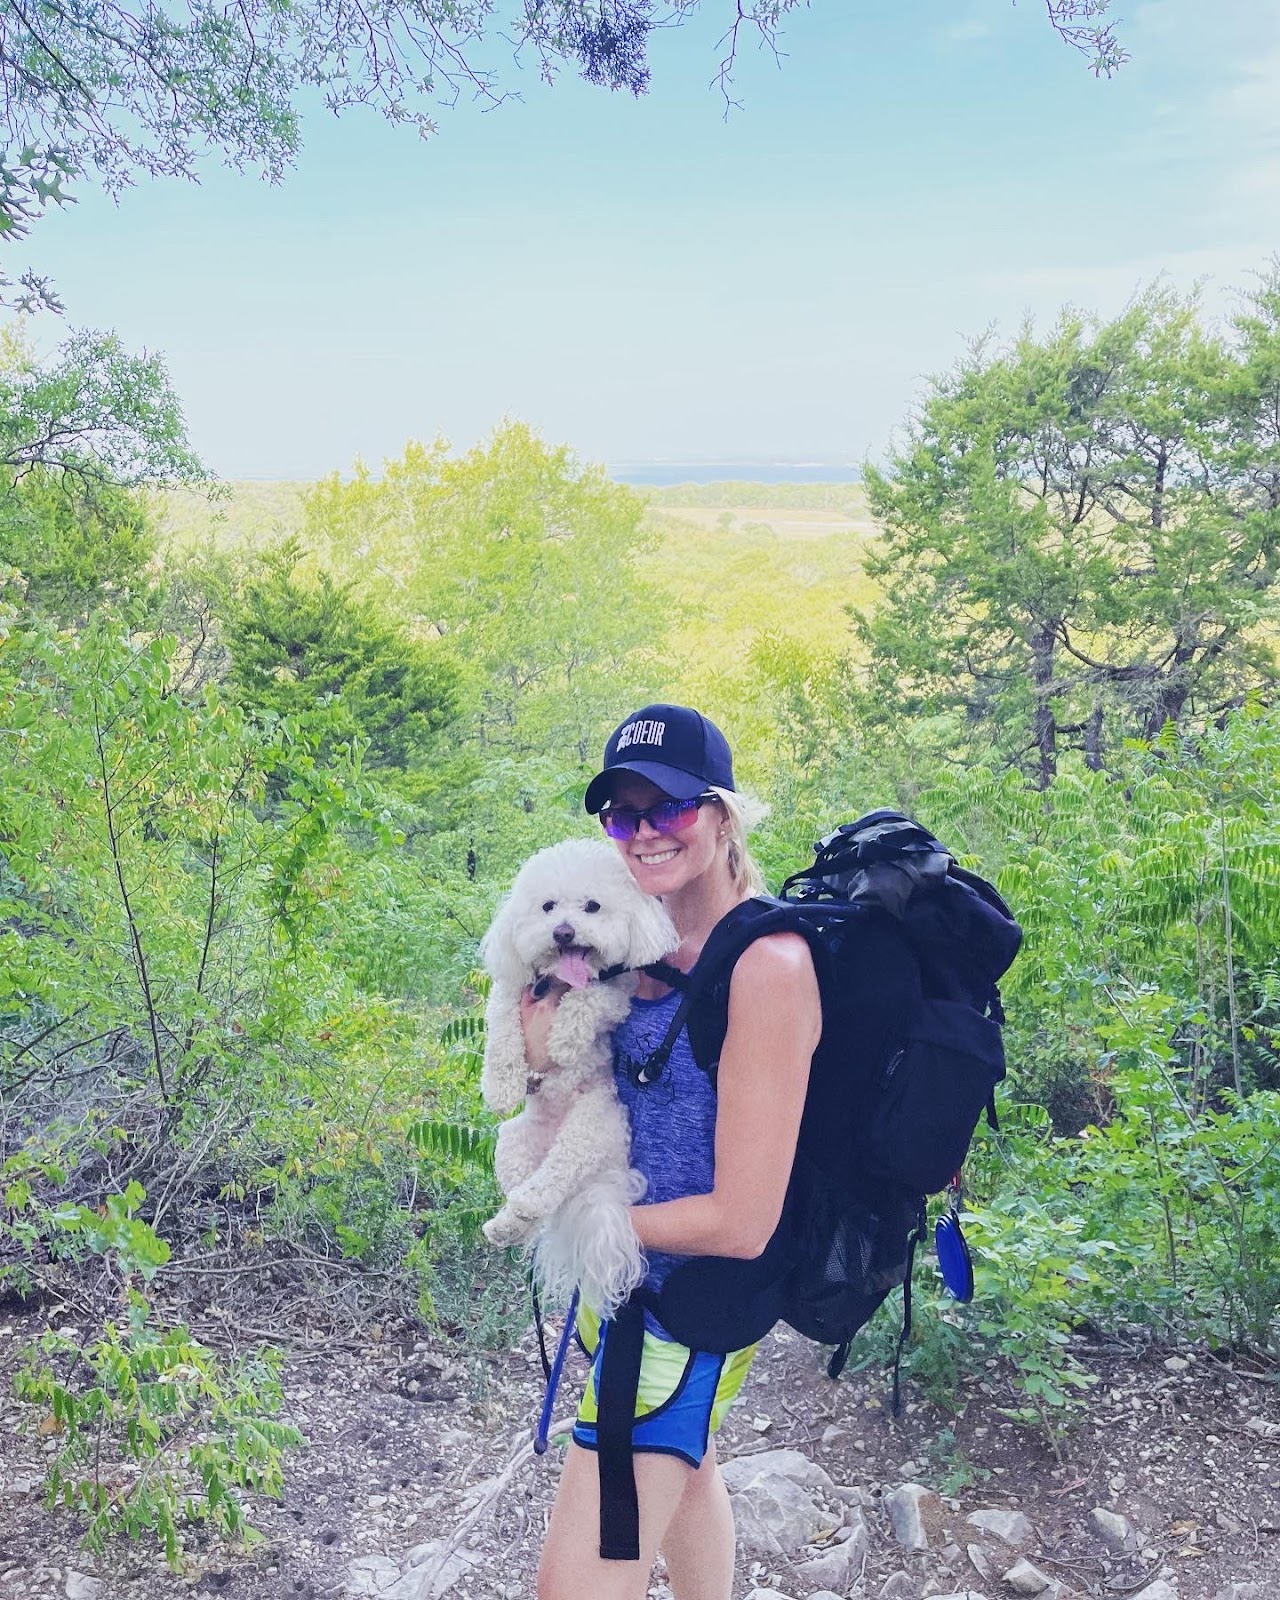 walking in nature - hiking with pets